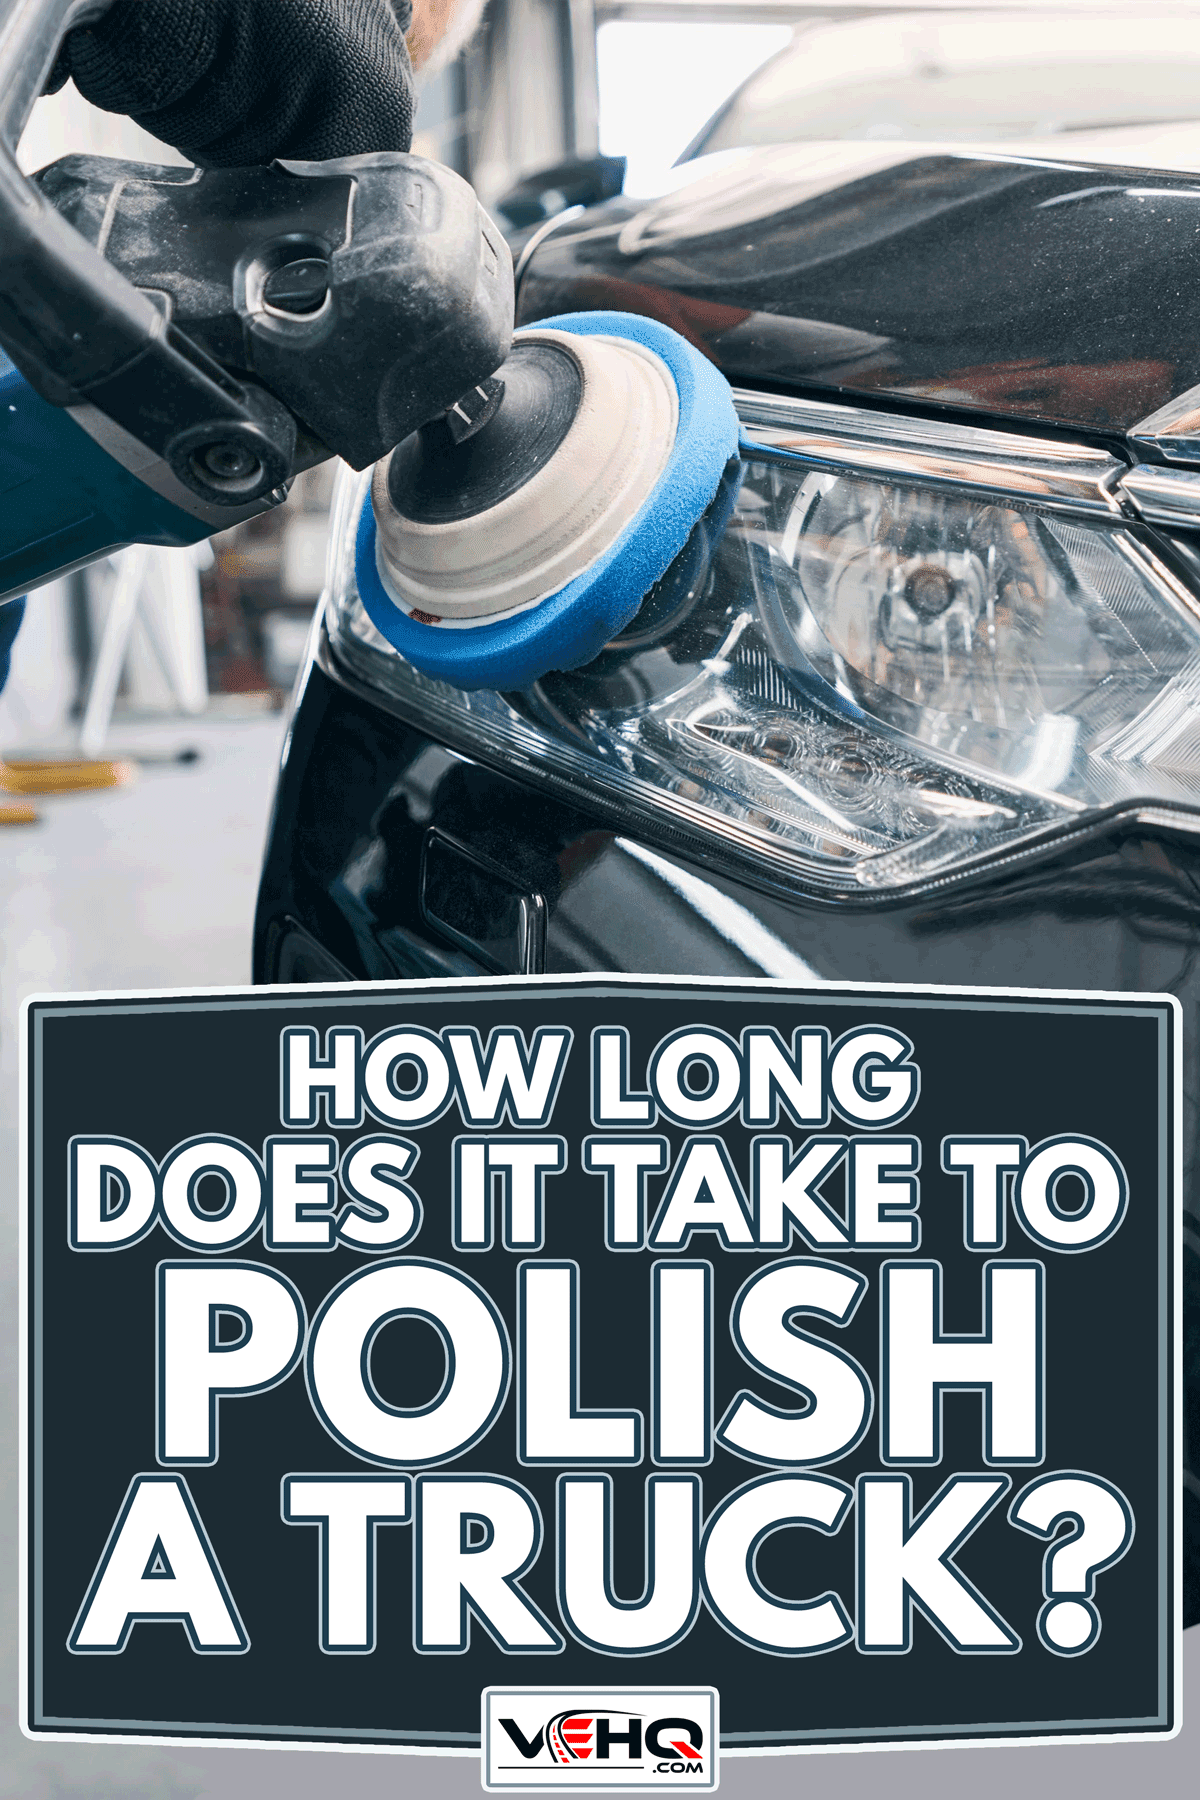 Repair workshop specialist cleaning headlight with polisher, How Long Does It Take To Polish a Truck?